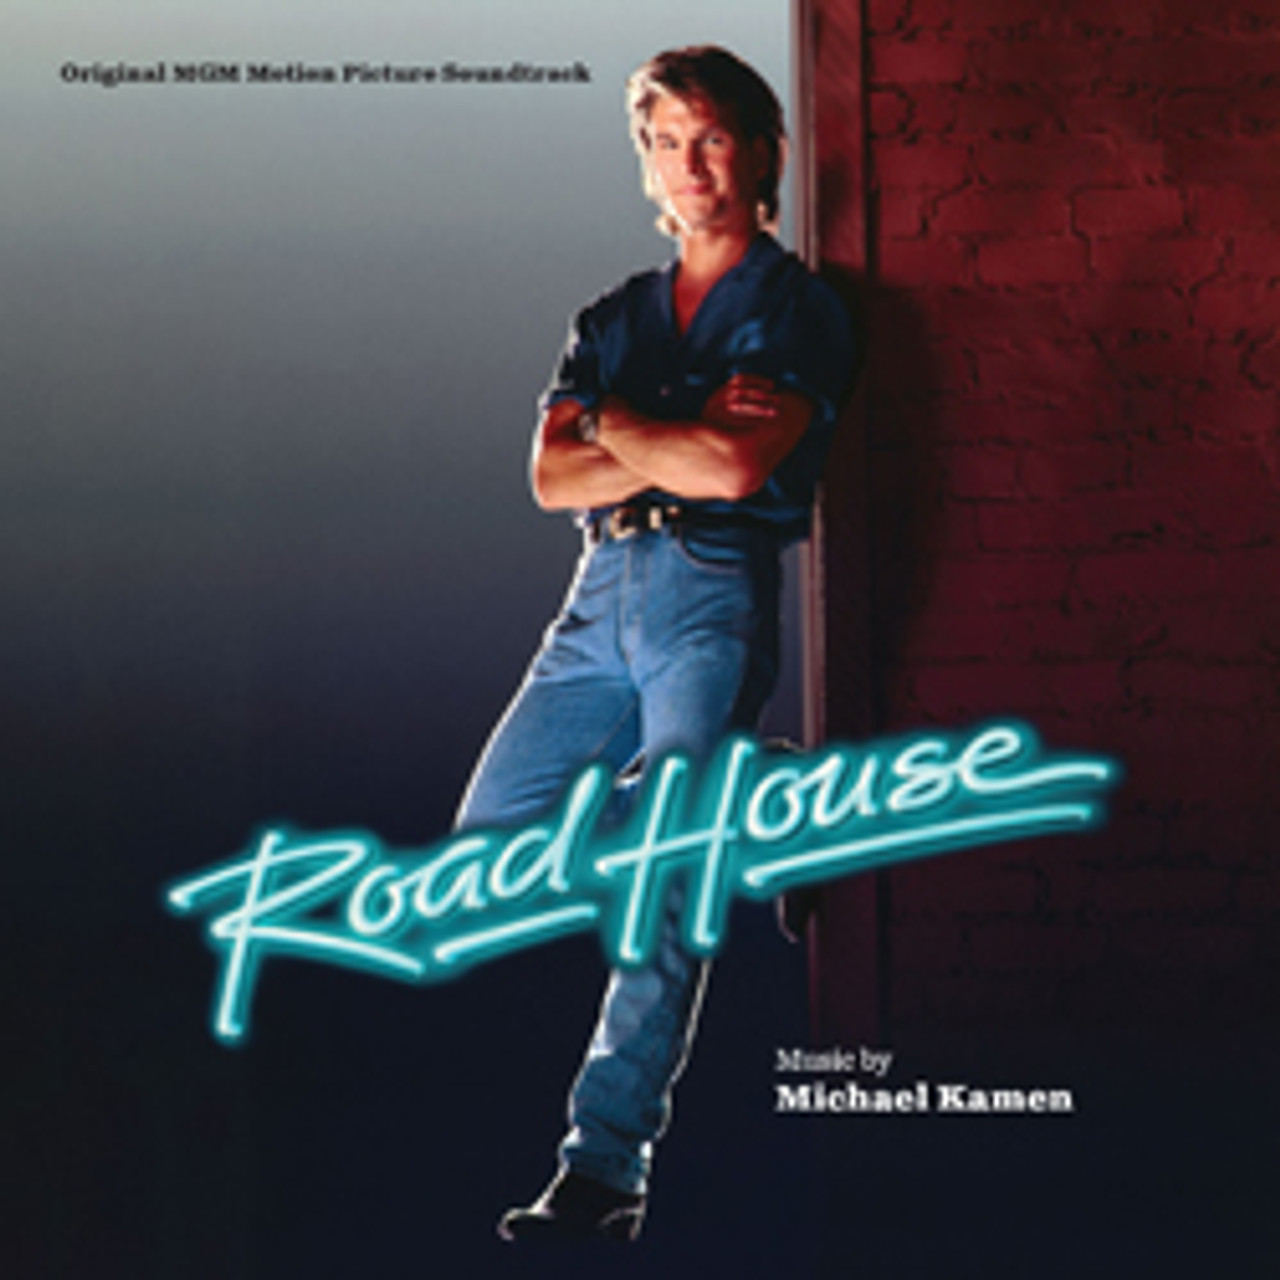 Road House 30th Anniversary Limited Edition